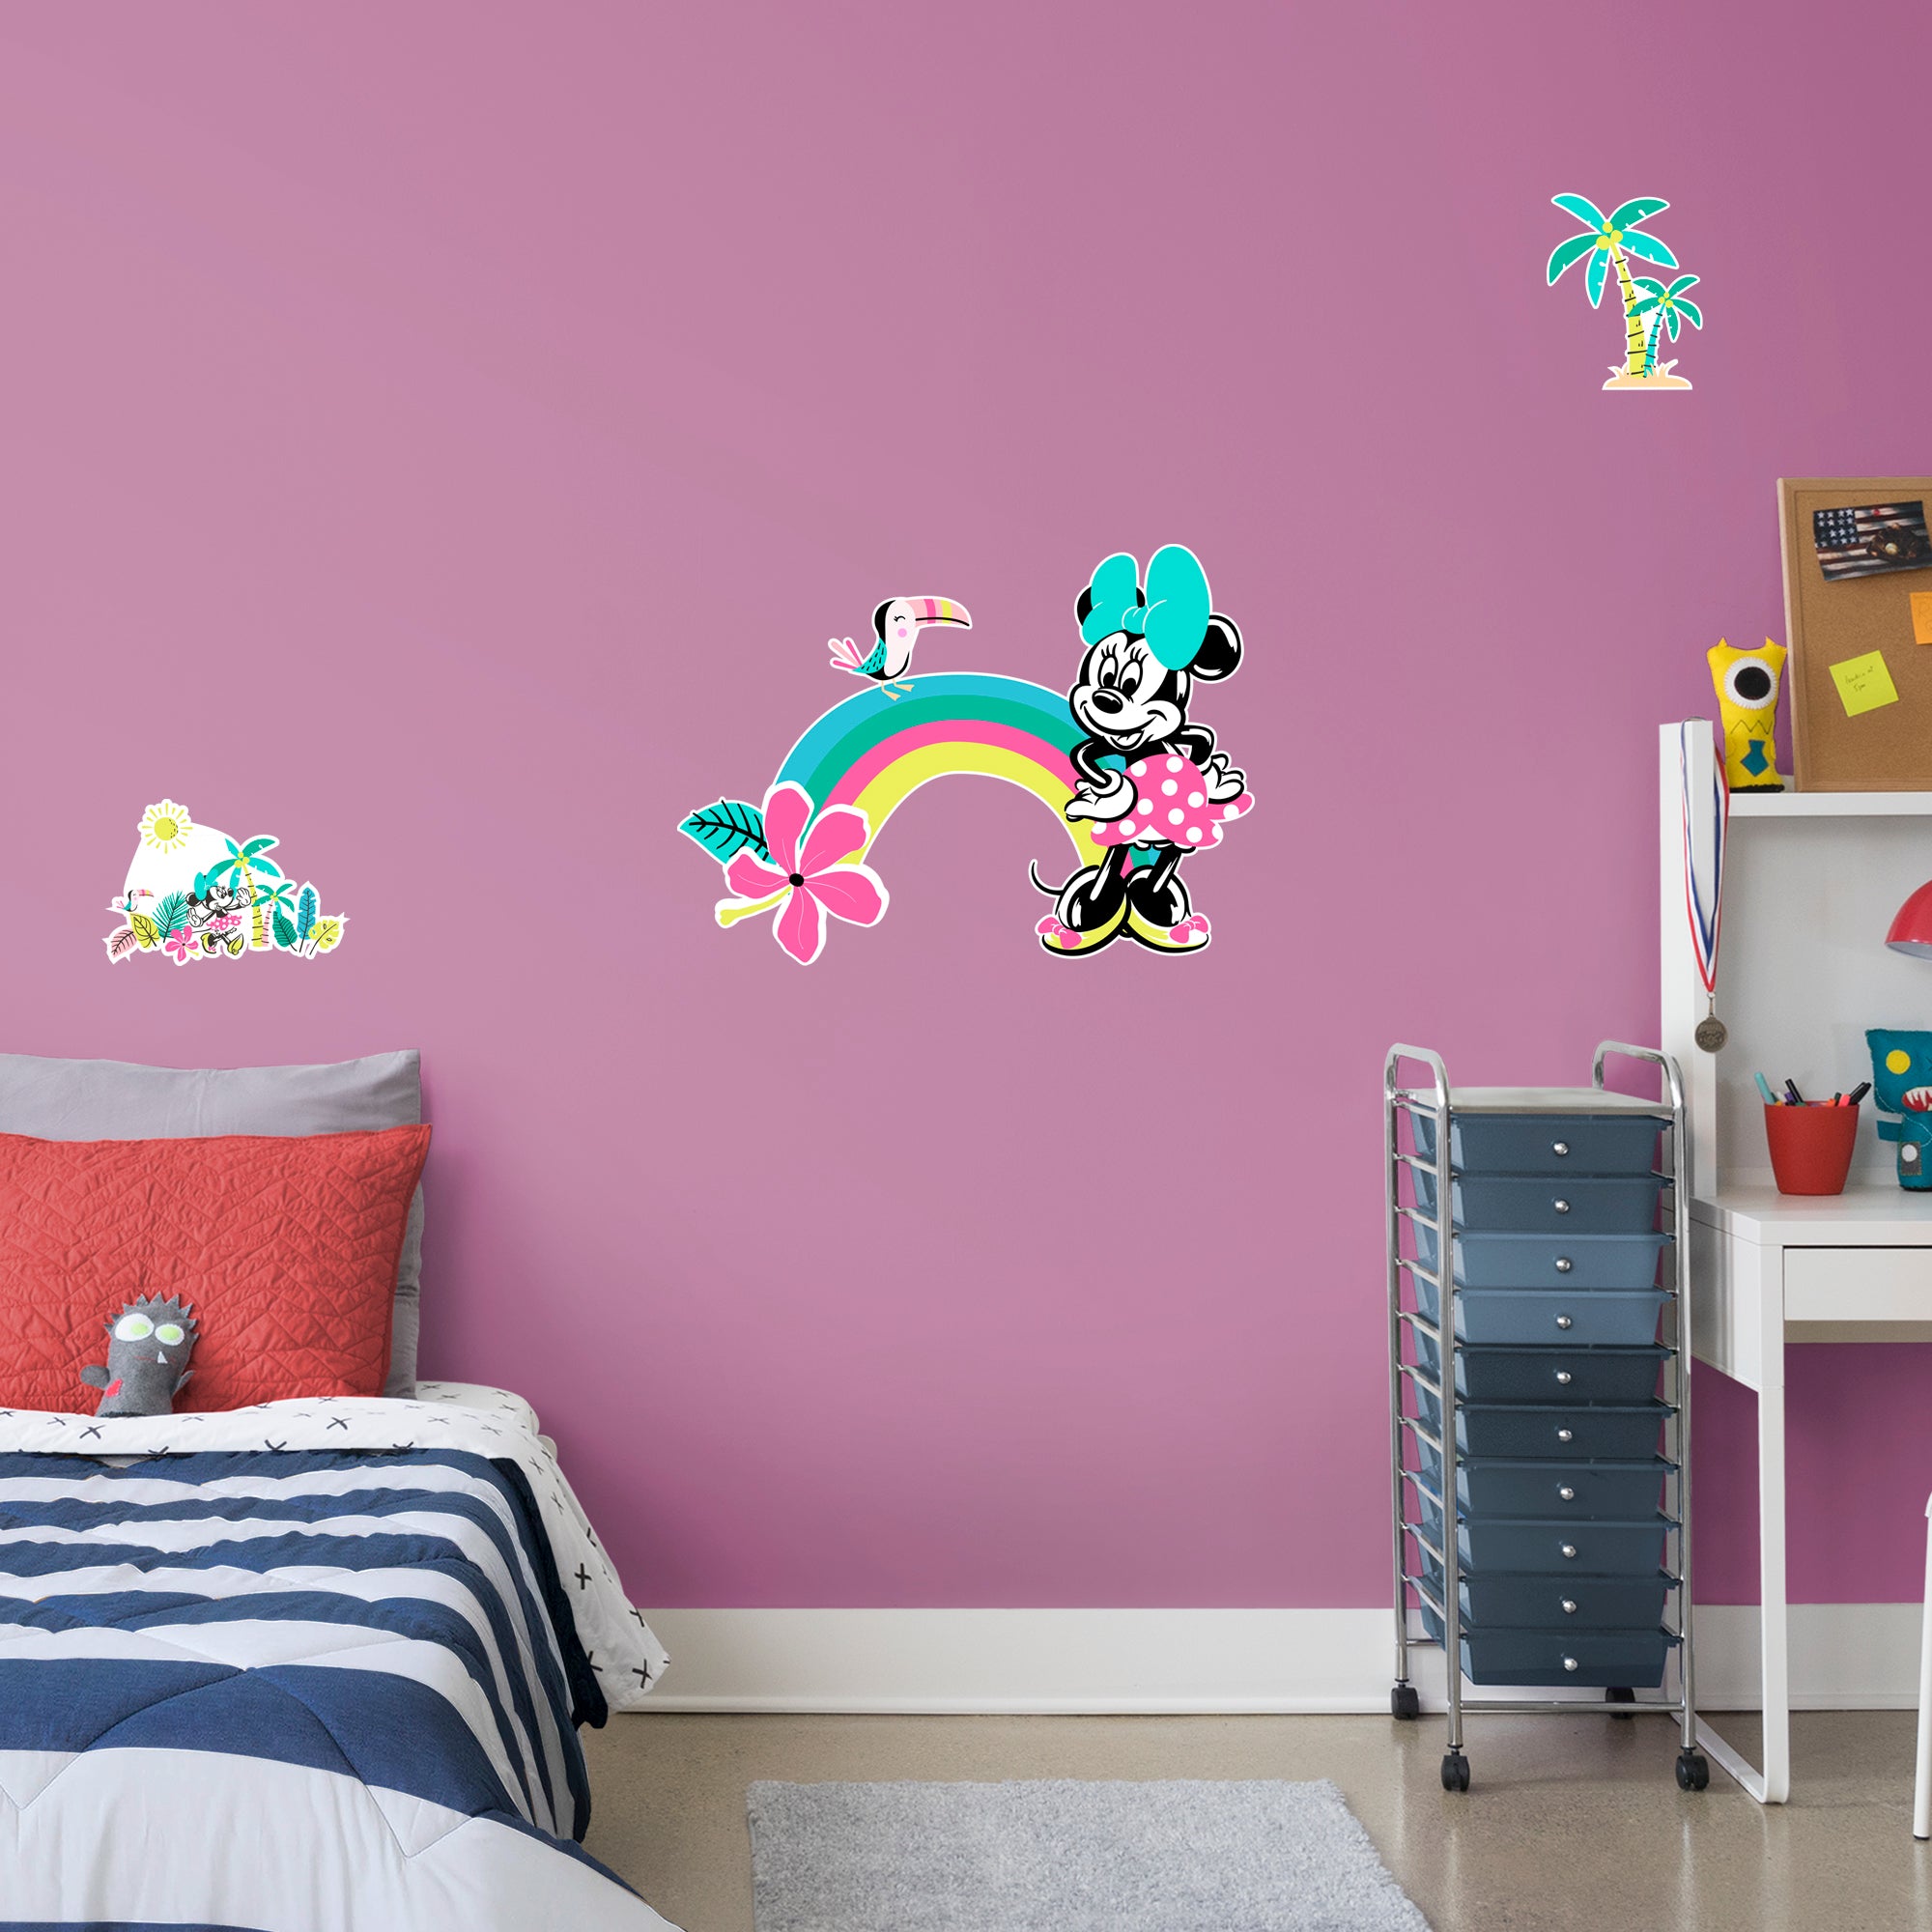 Minnie Mouse Tropical Fun - Officially Licensed Disney Removable Wall Decal XL by Fathead | Vinyl